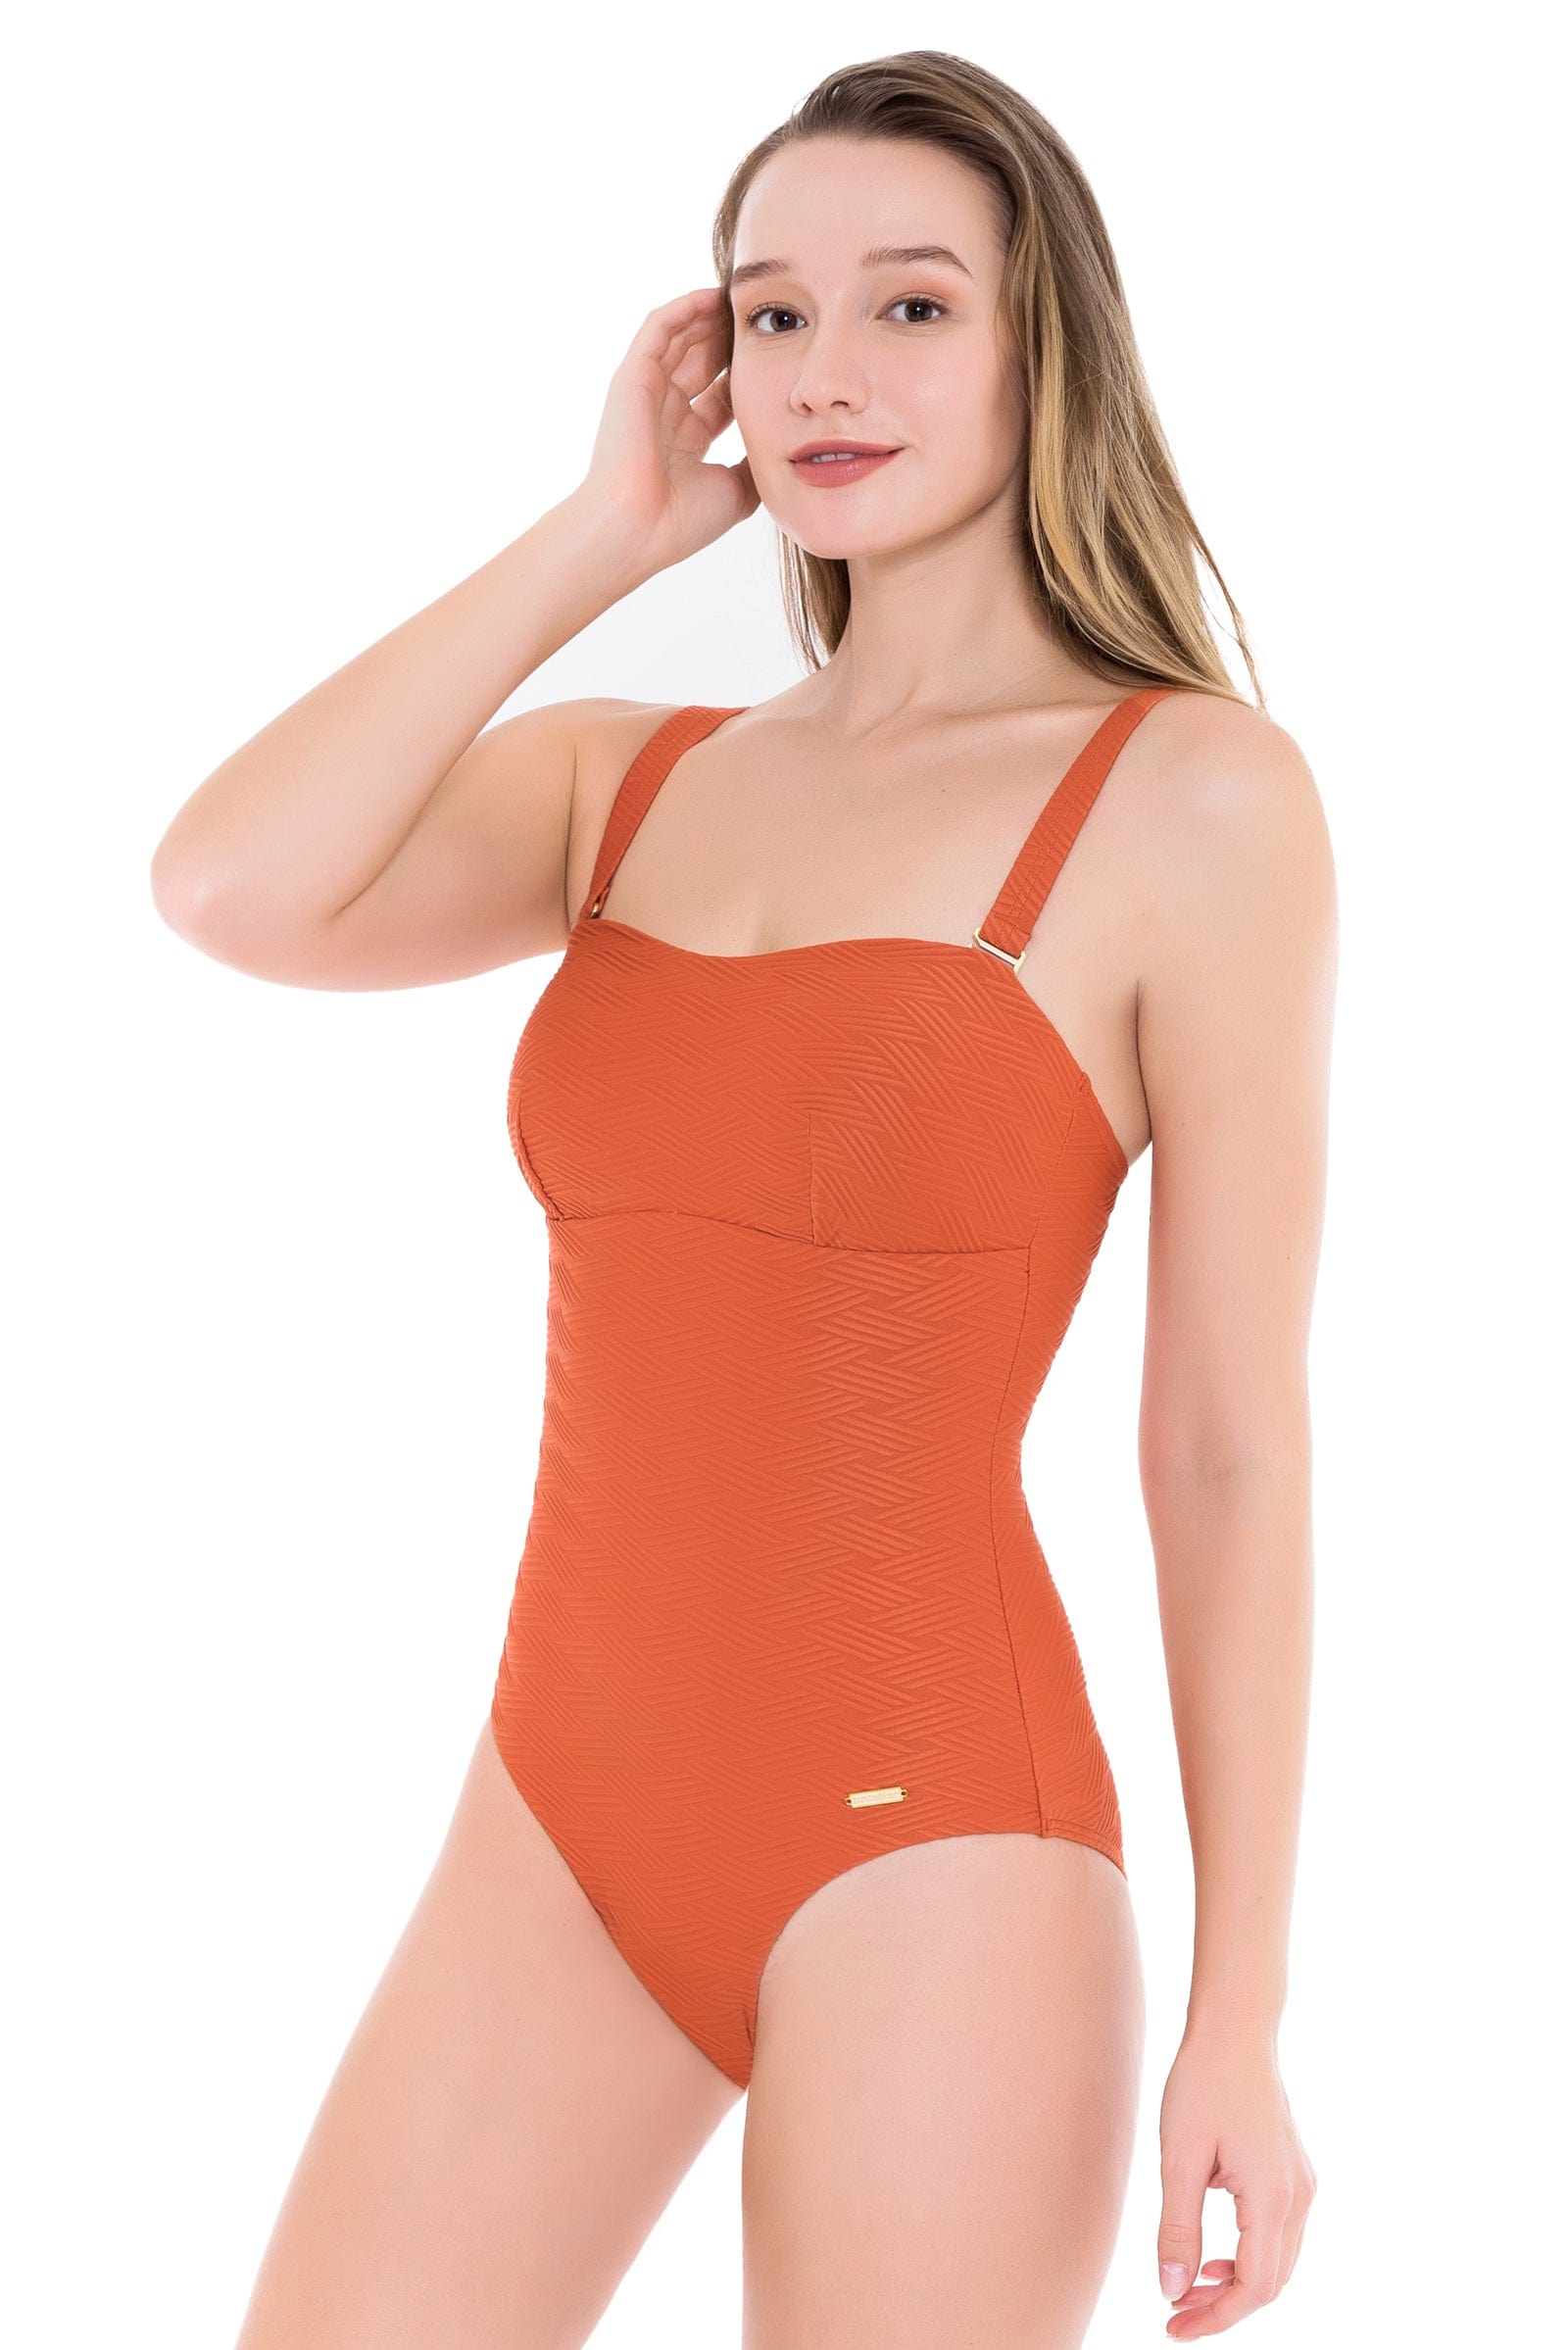 Plus Cup Onepiece Sunkissed Texture Rust Plus Cup One Piece - Sunseeker